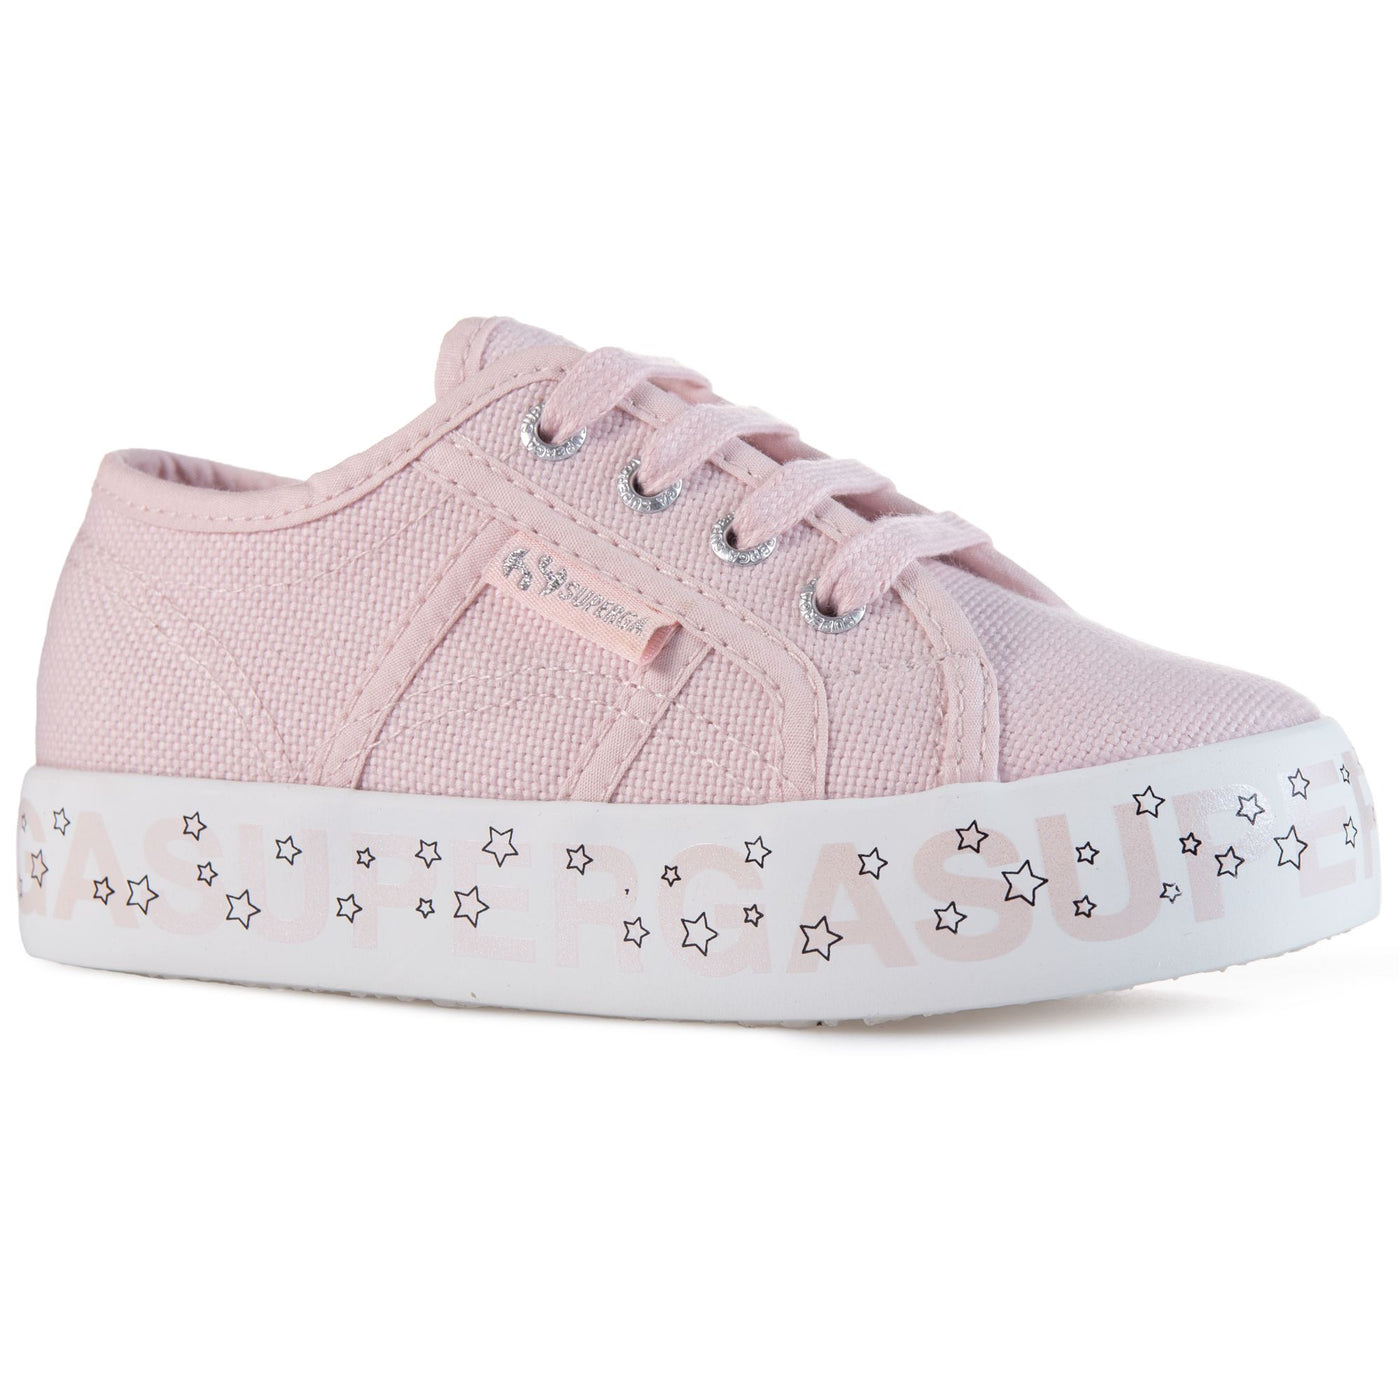 Lady Shoes Girl 2730 KIDS LETTERING PRINTED PLATFORM Wedge PINK PALE LILAC-BLACK STARS Detail Double				